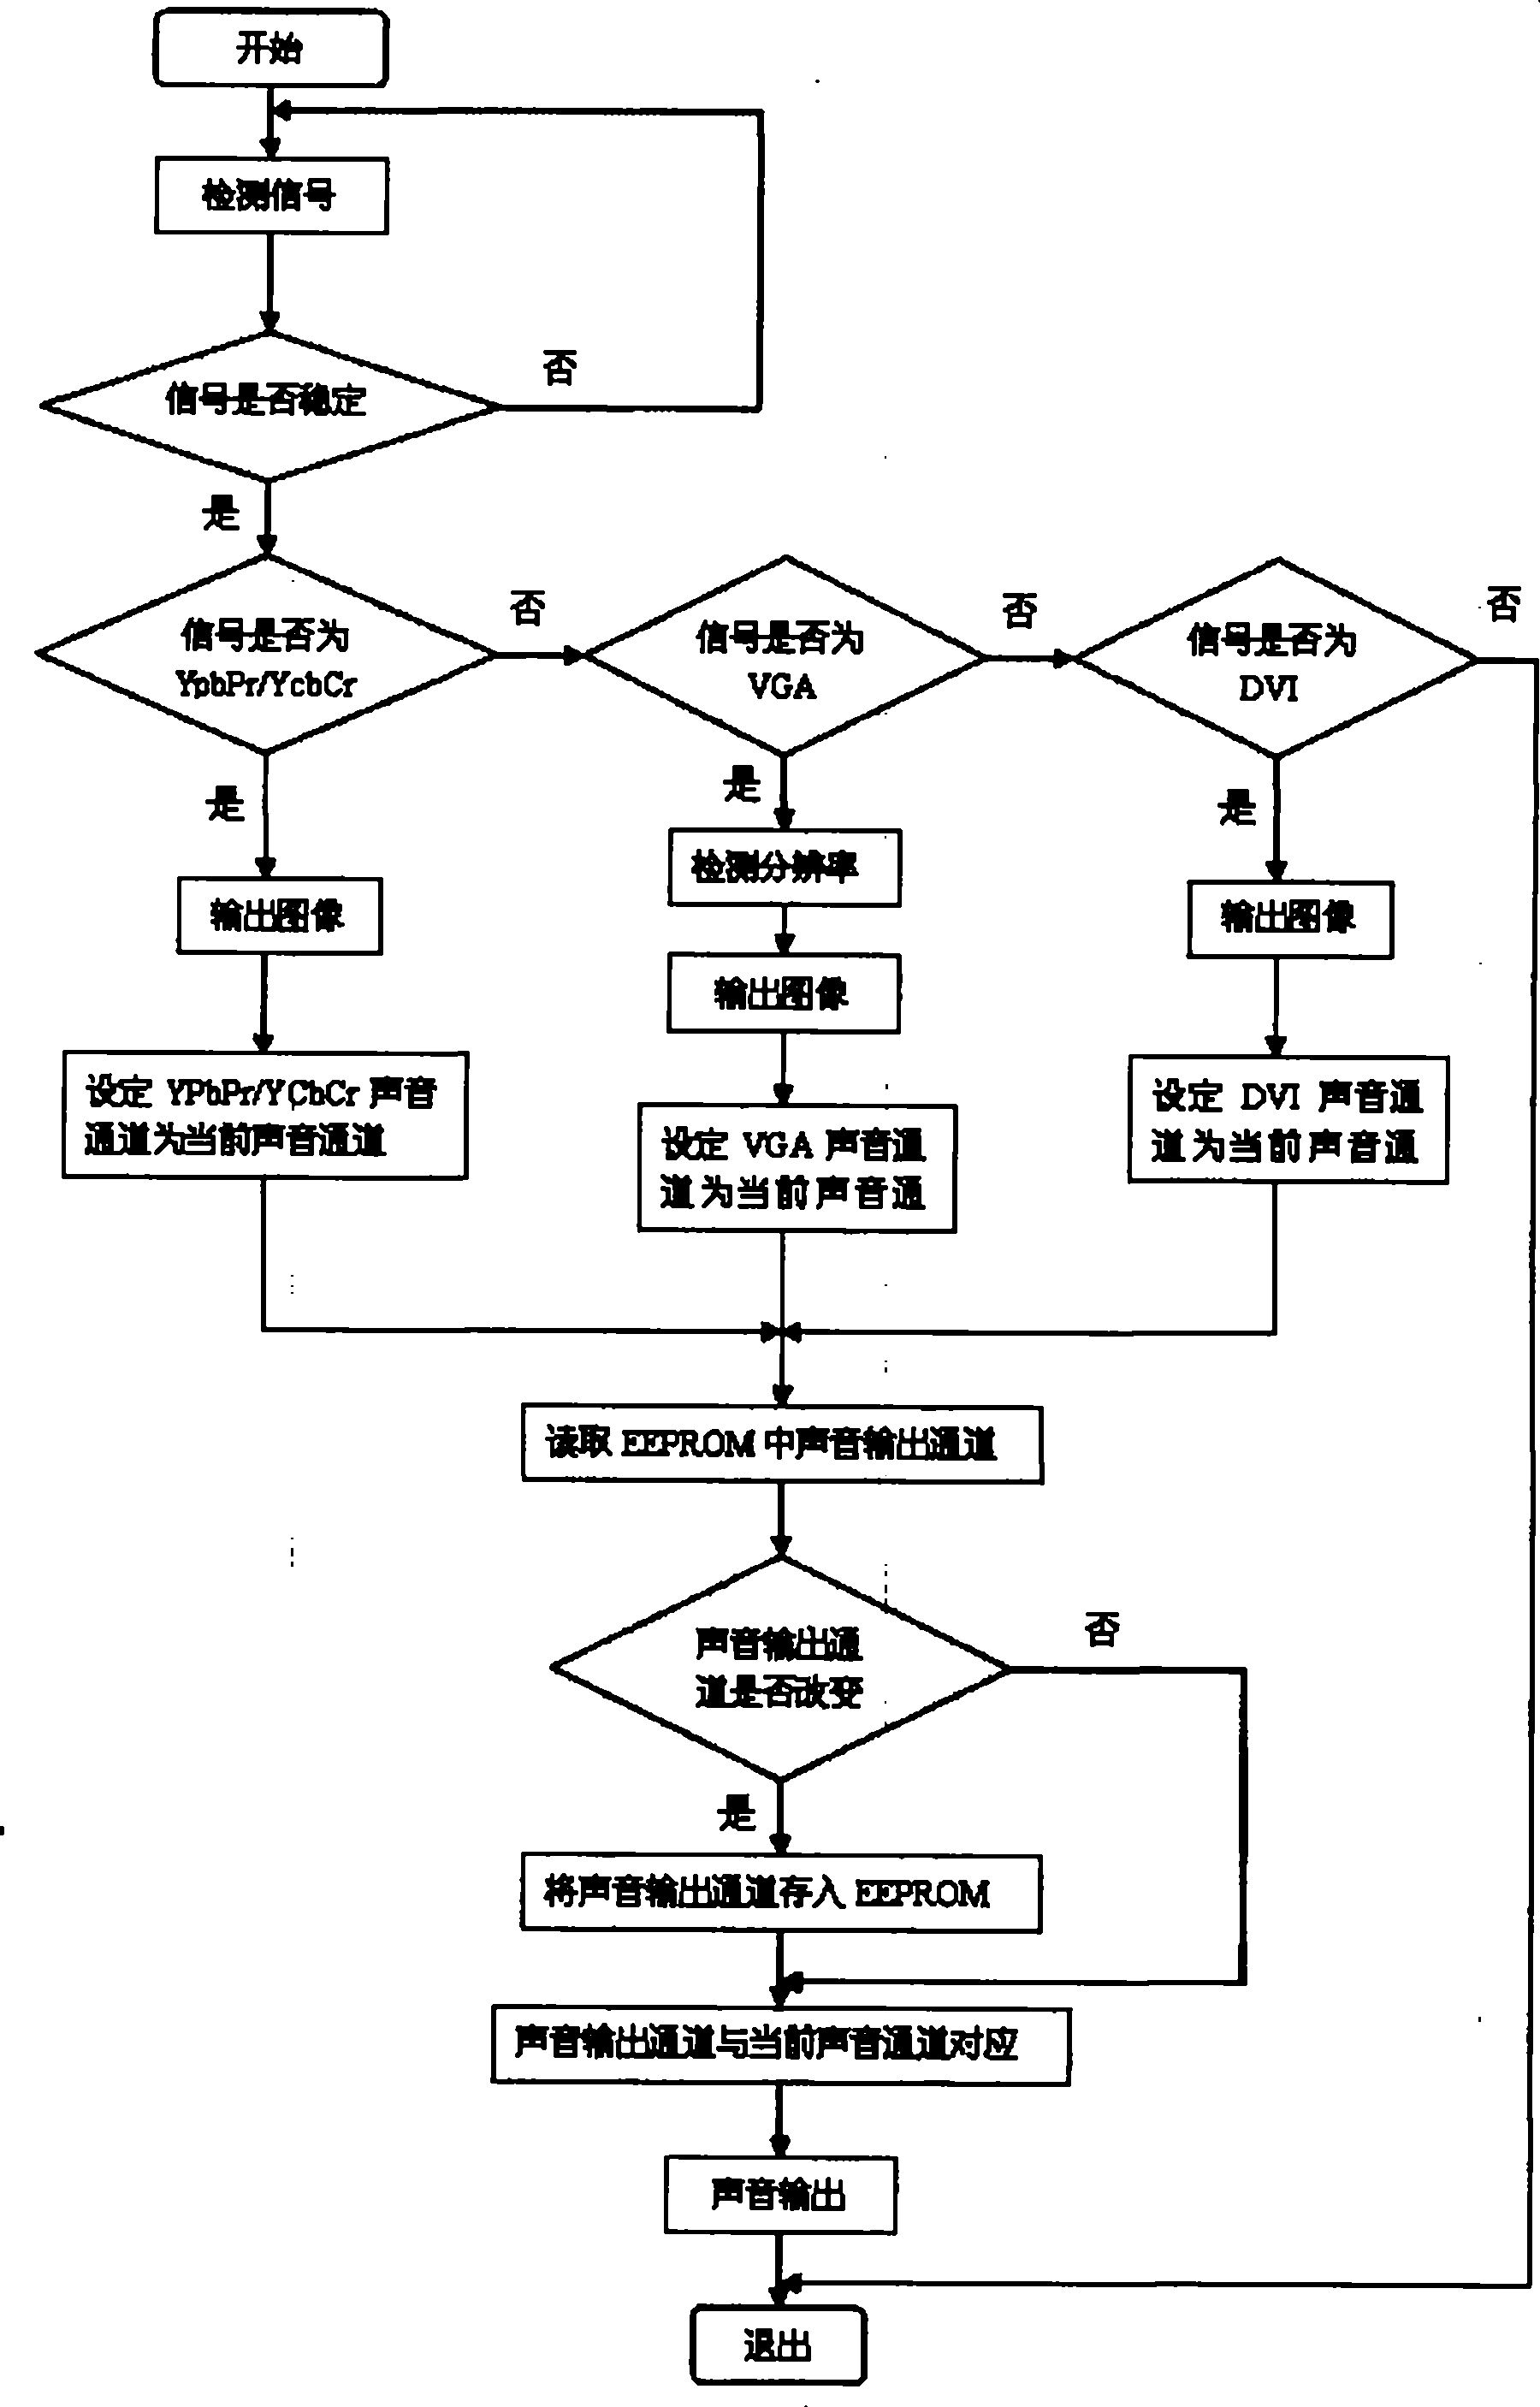 Method for selecting sound channel of television set